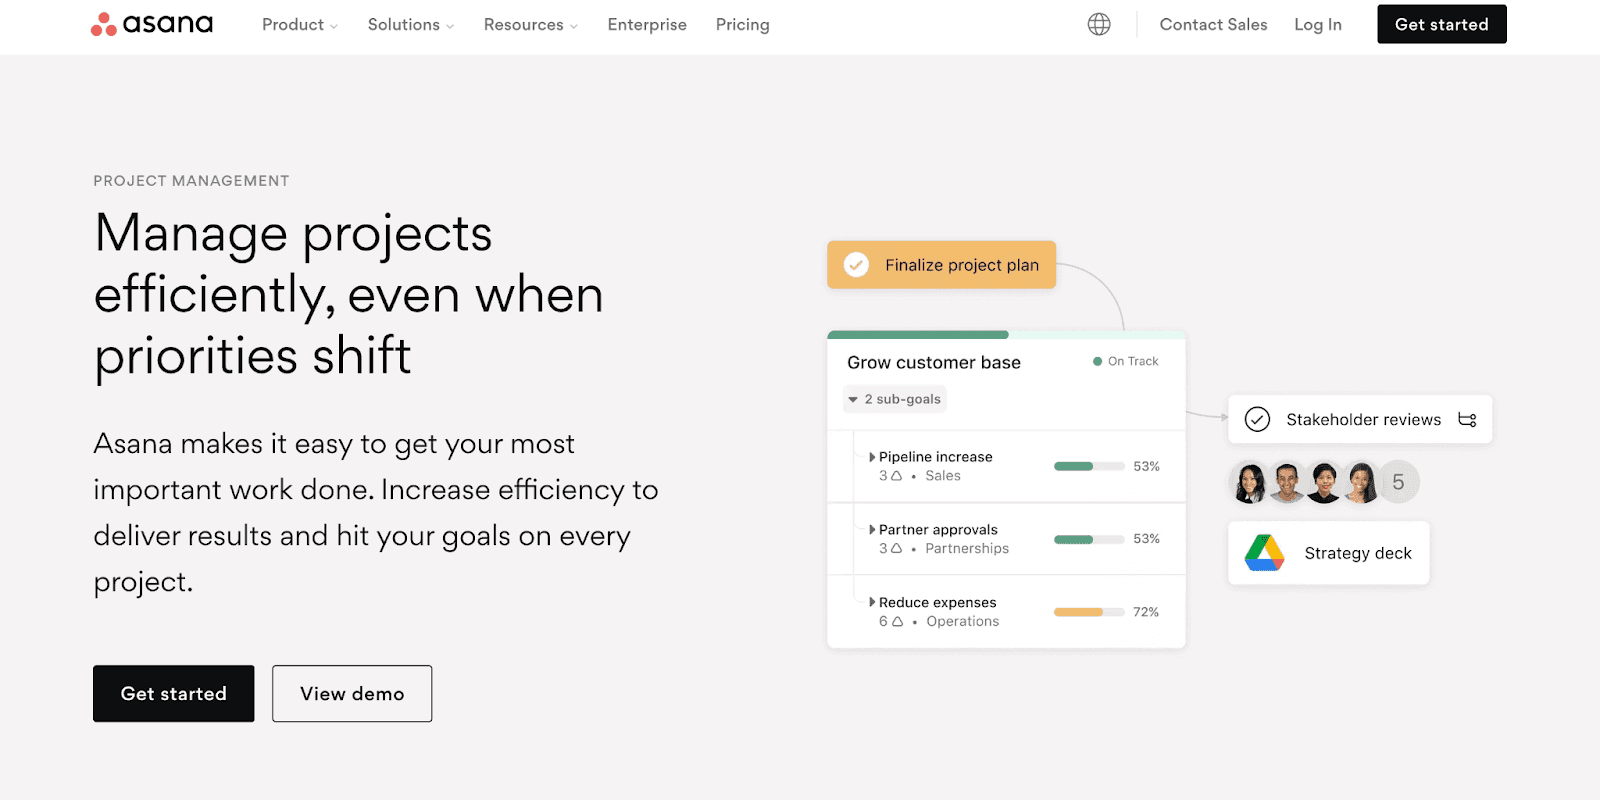 Asana website - manage projects efficiently, even when priorities shift